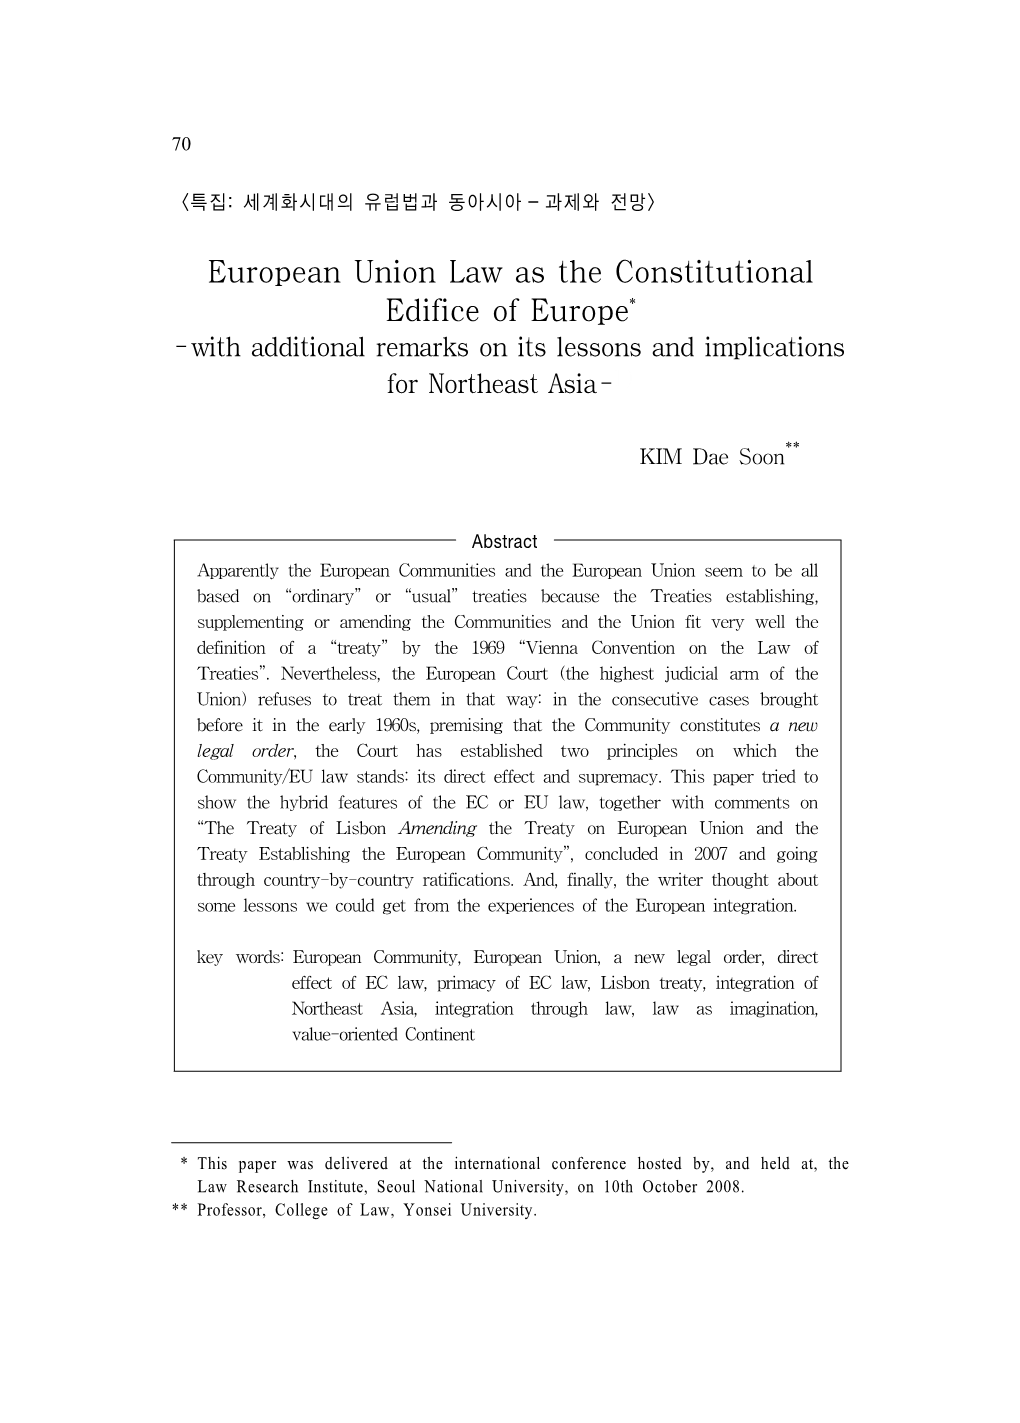 European Union Law As the Constitutional Edifice of Europe* - with Additional Remarks on Its Lessons and Implications for Northeast Asia -1)